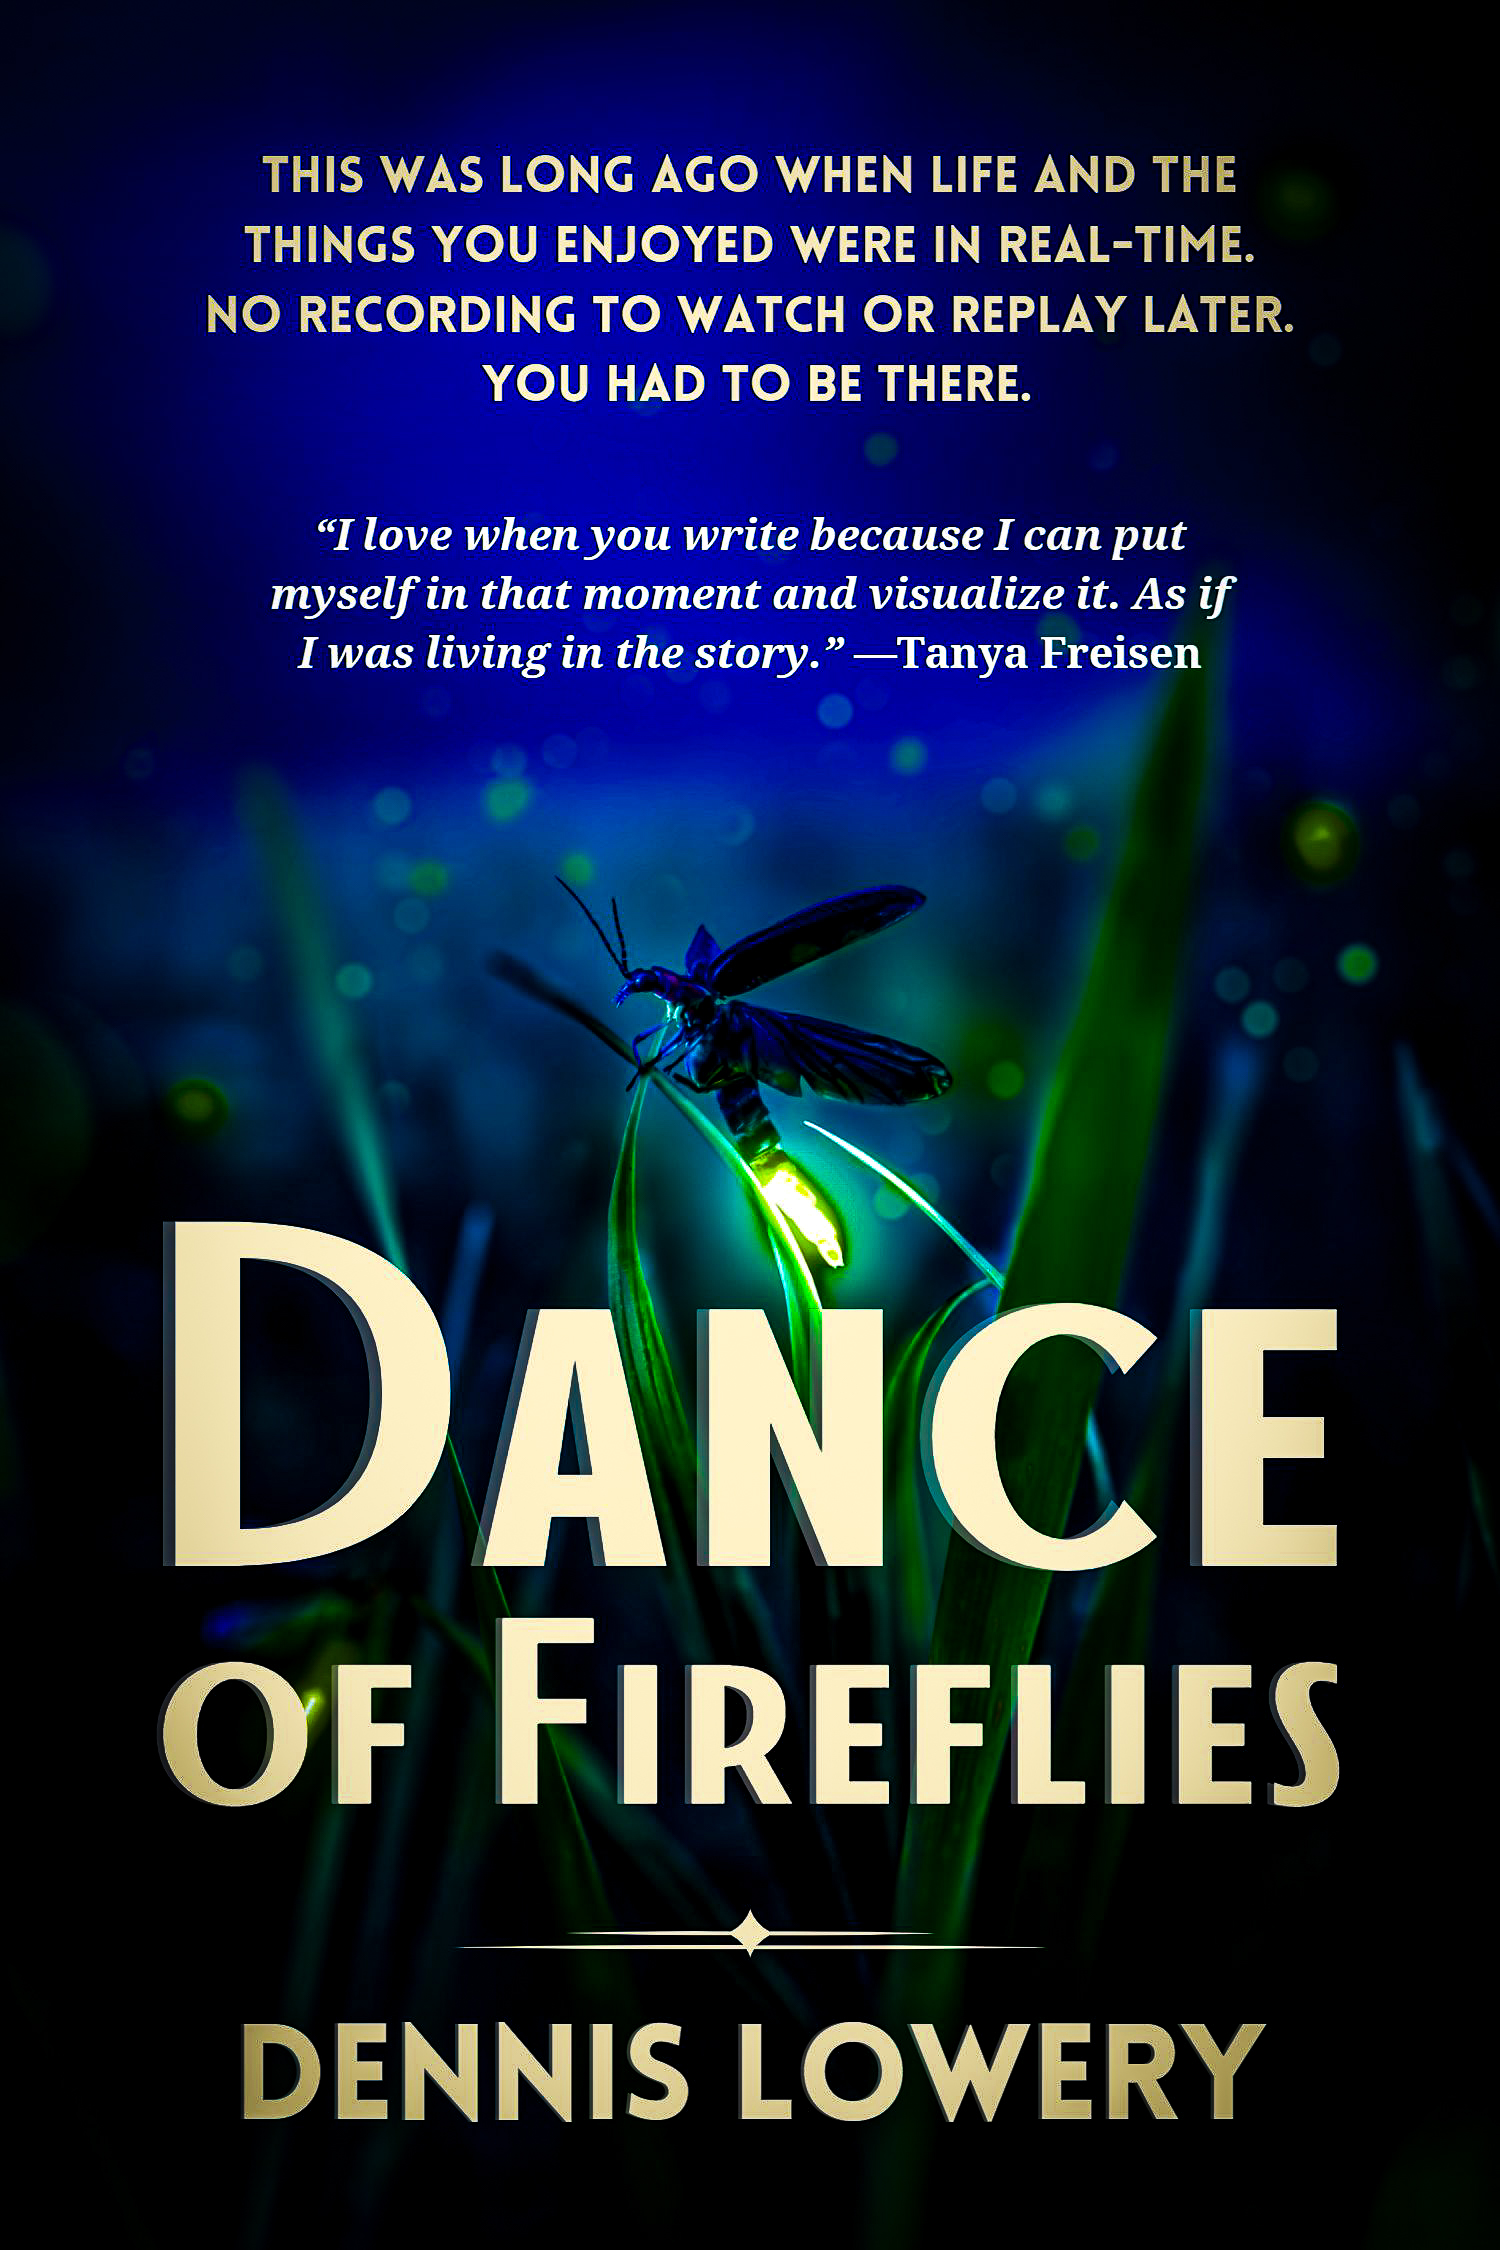 Dance of Fireflies (2023) A Creative Nonfiction Vignette from Dennis Lowery